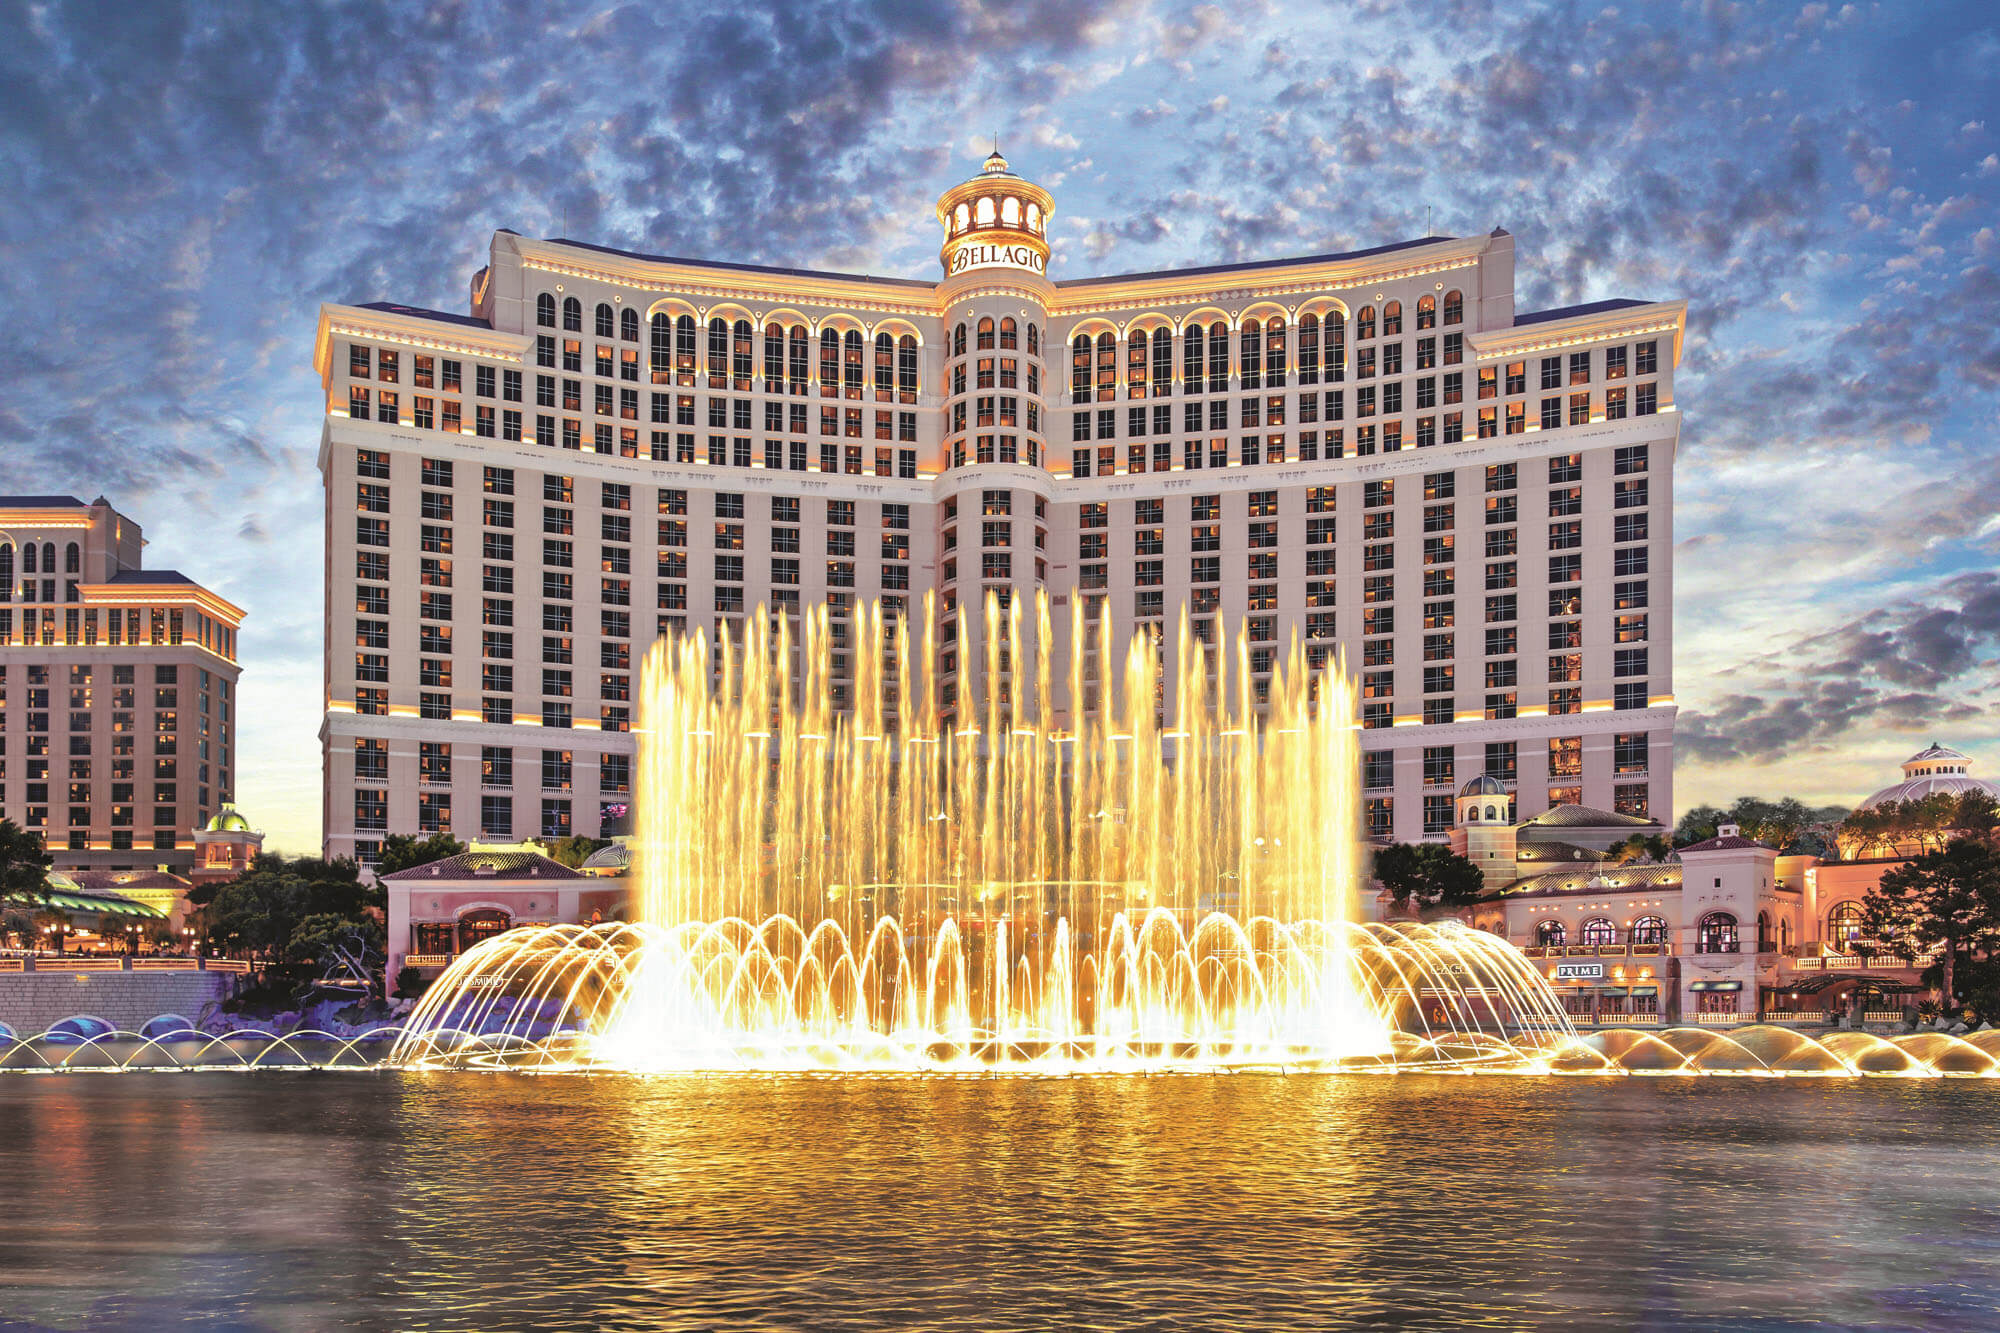 New York-New York, Bellagio could be first MGM properties to reopen